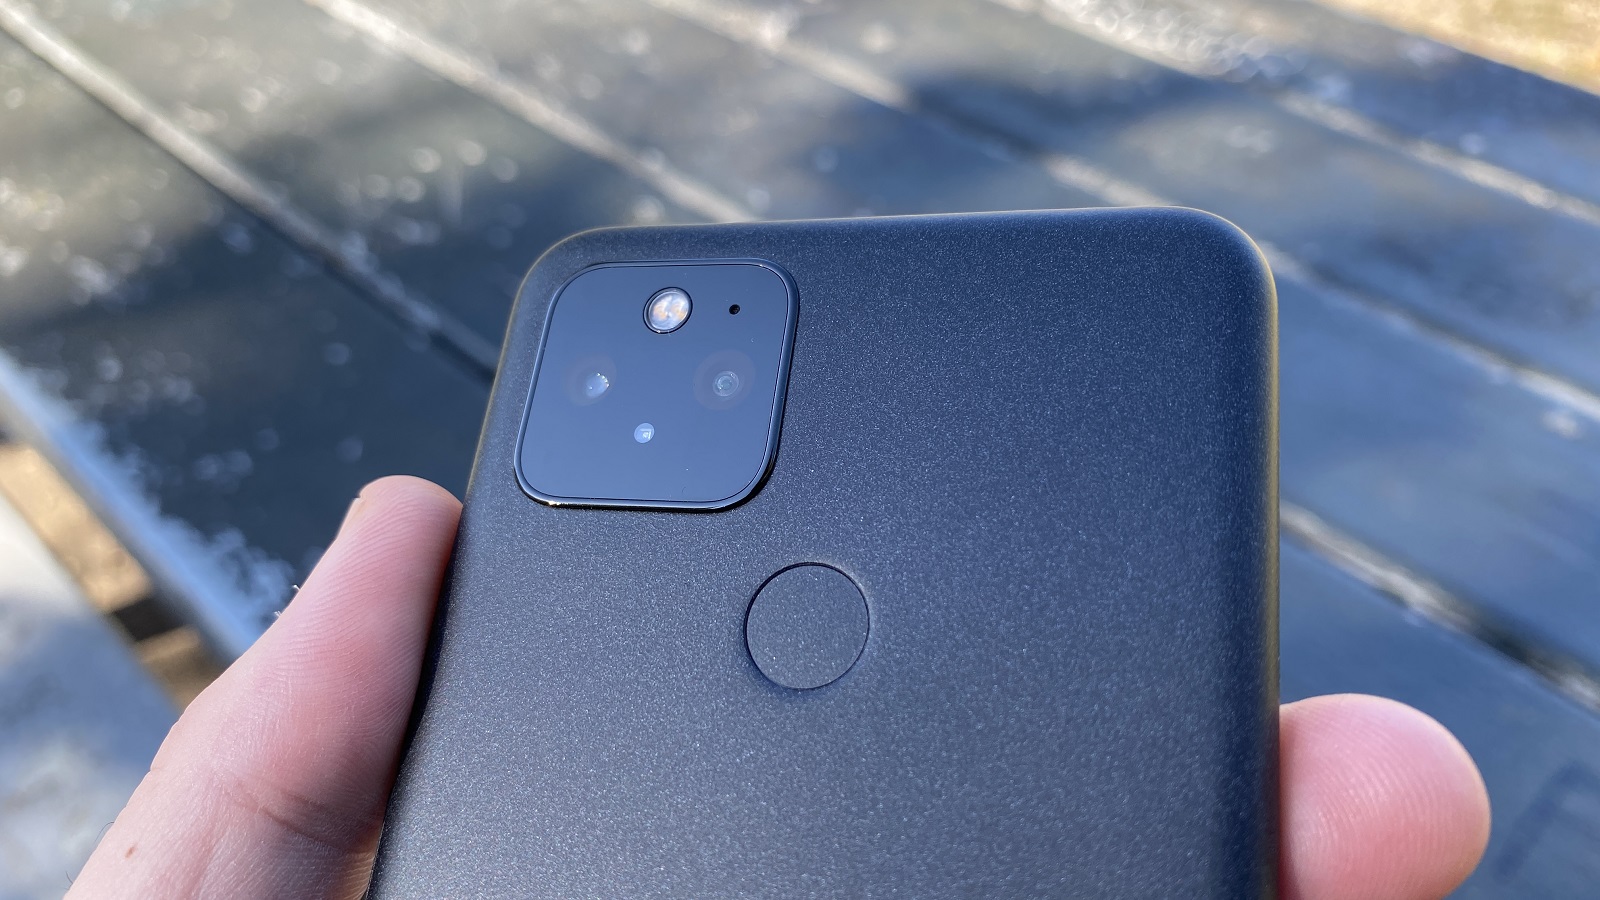 Google Pixel 5 review: an affordable flagship with some compromises ...